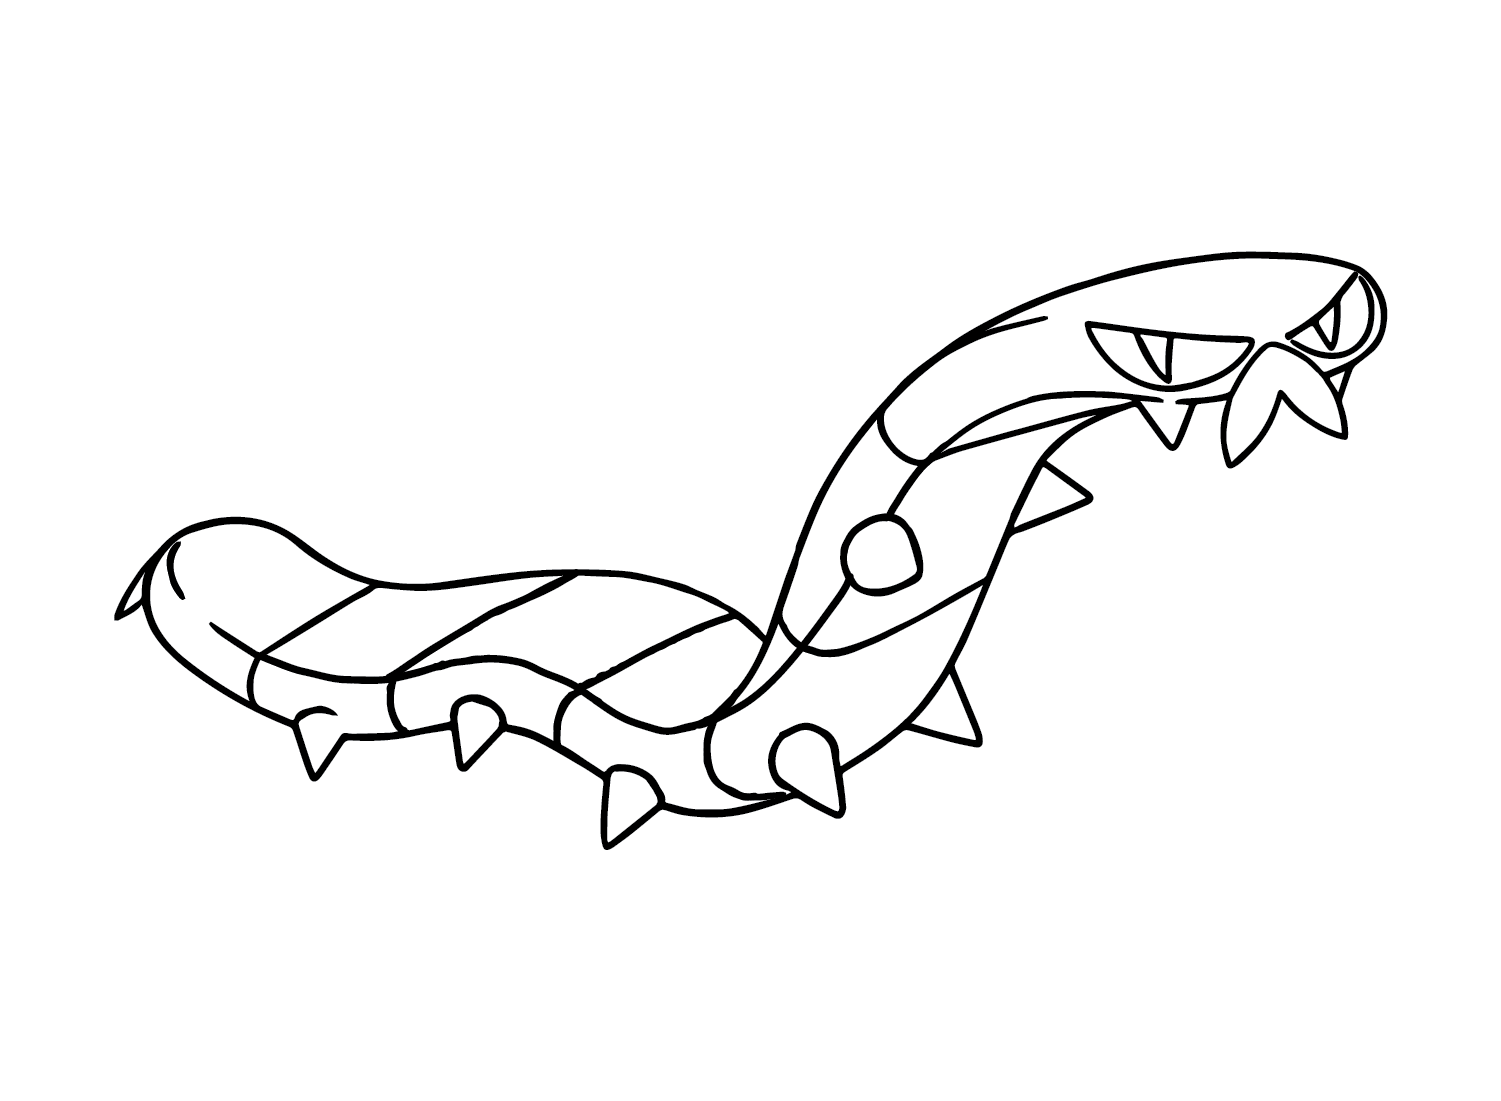 Sizzlipede Drawing from Sizzlipede